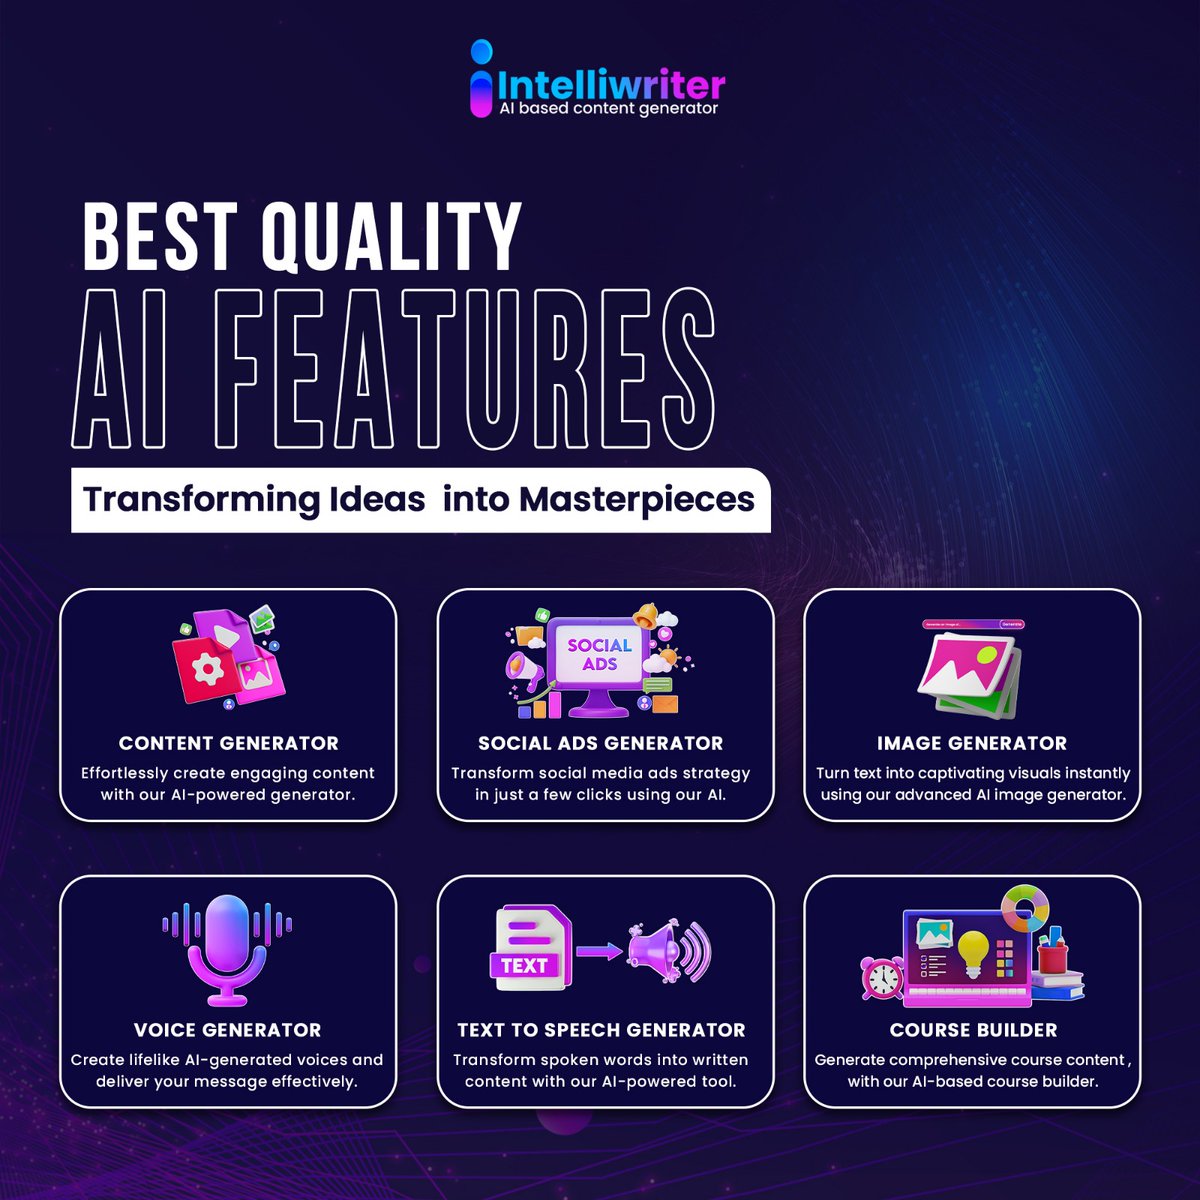 Our top-notch features are revolutionizing content creation:
1️⃣ Content Generator
2️⃣ Social Ads Generator
3️⃣ Image Generator
4️⃣ Voice Generator
5️⃣ Text-to-Speech Generator
6️⃣ Course Builder

intelliwriter.io

#Intelliwriter #AIbasedcontentgenerator #AIImagegenerator #AI